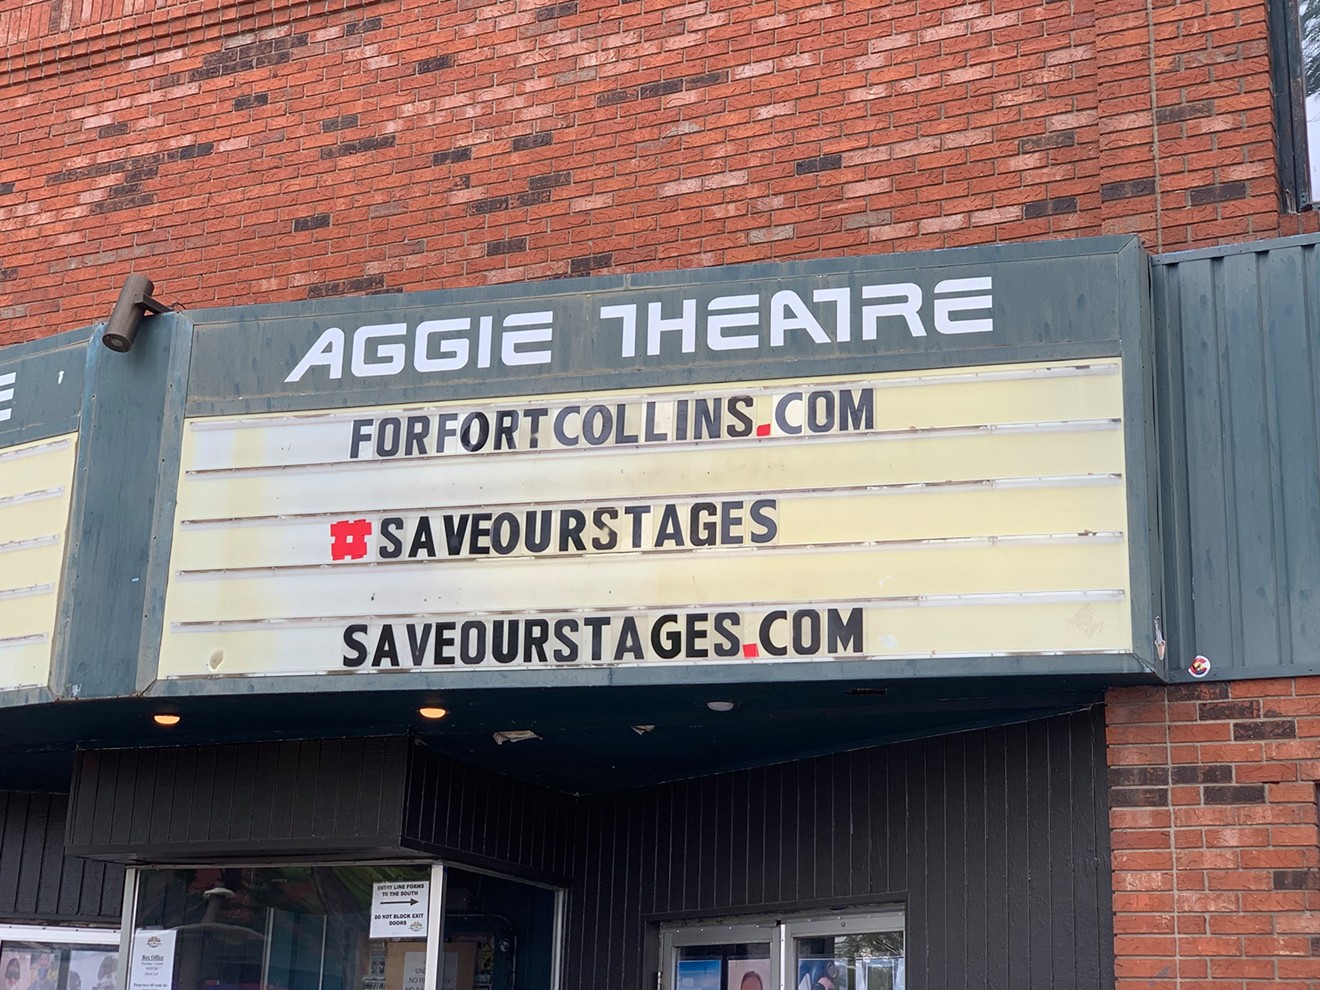 The Aggie Theatre will reopen on October 24.